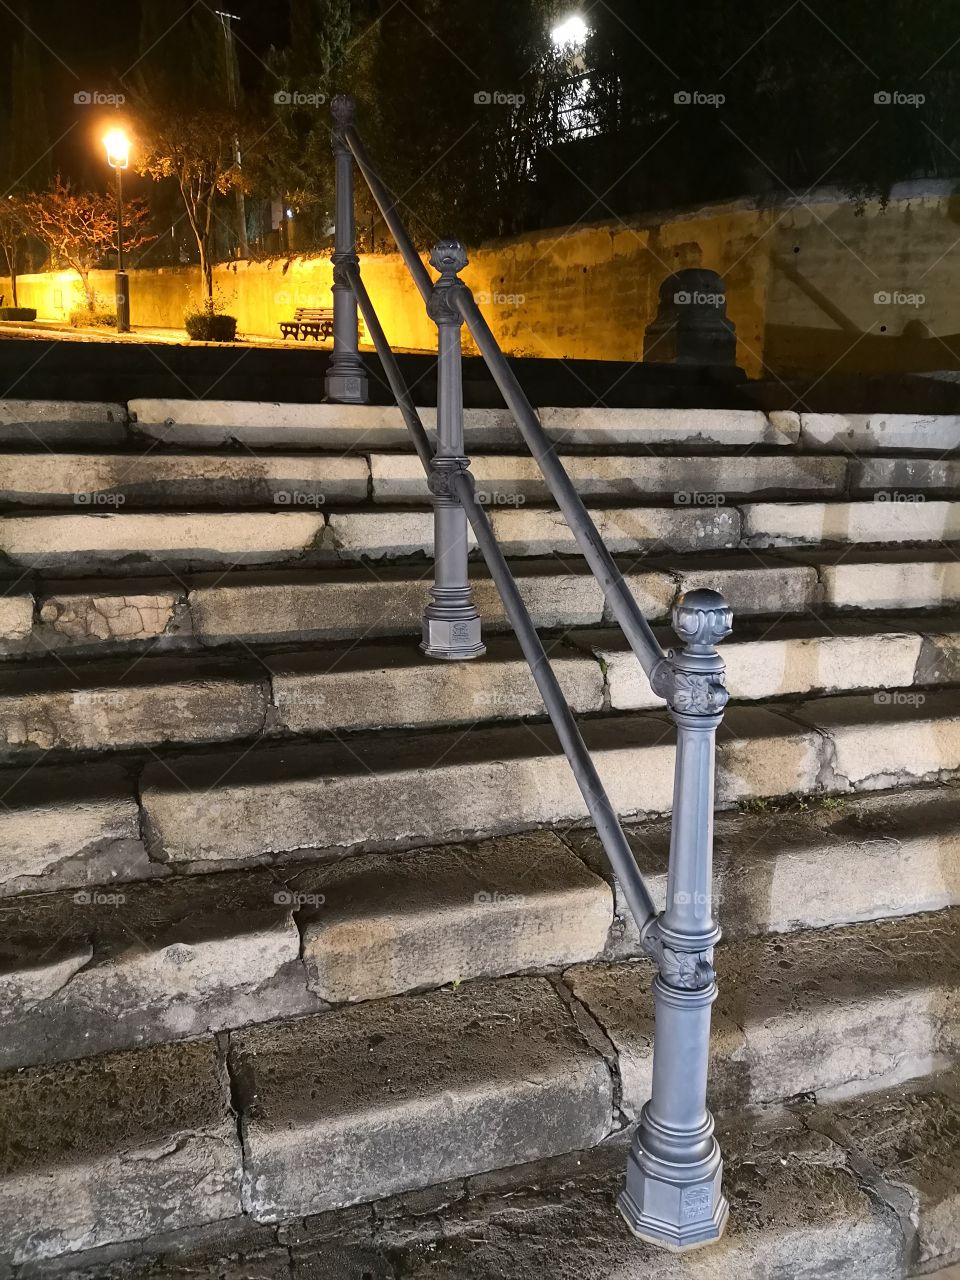 Stairs of Mealhada Fountain, Night, Castelo de Vide, Portugal